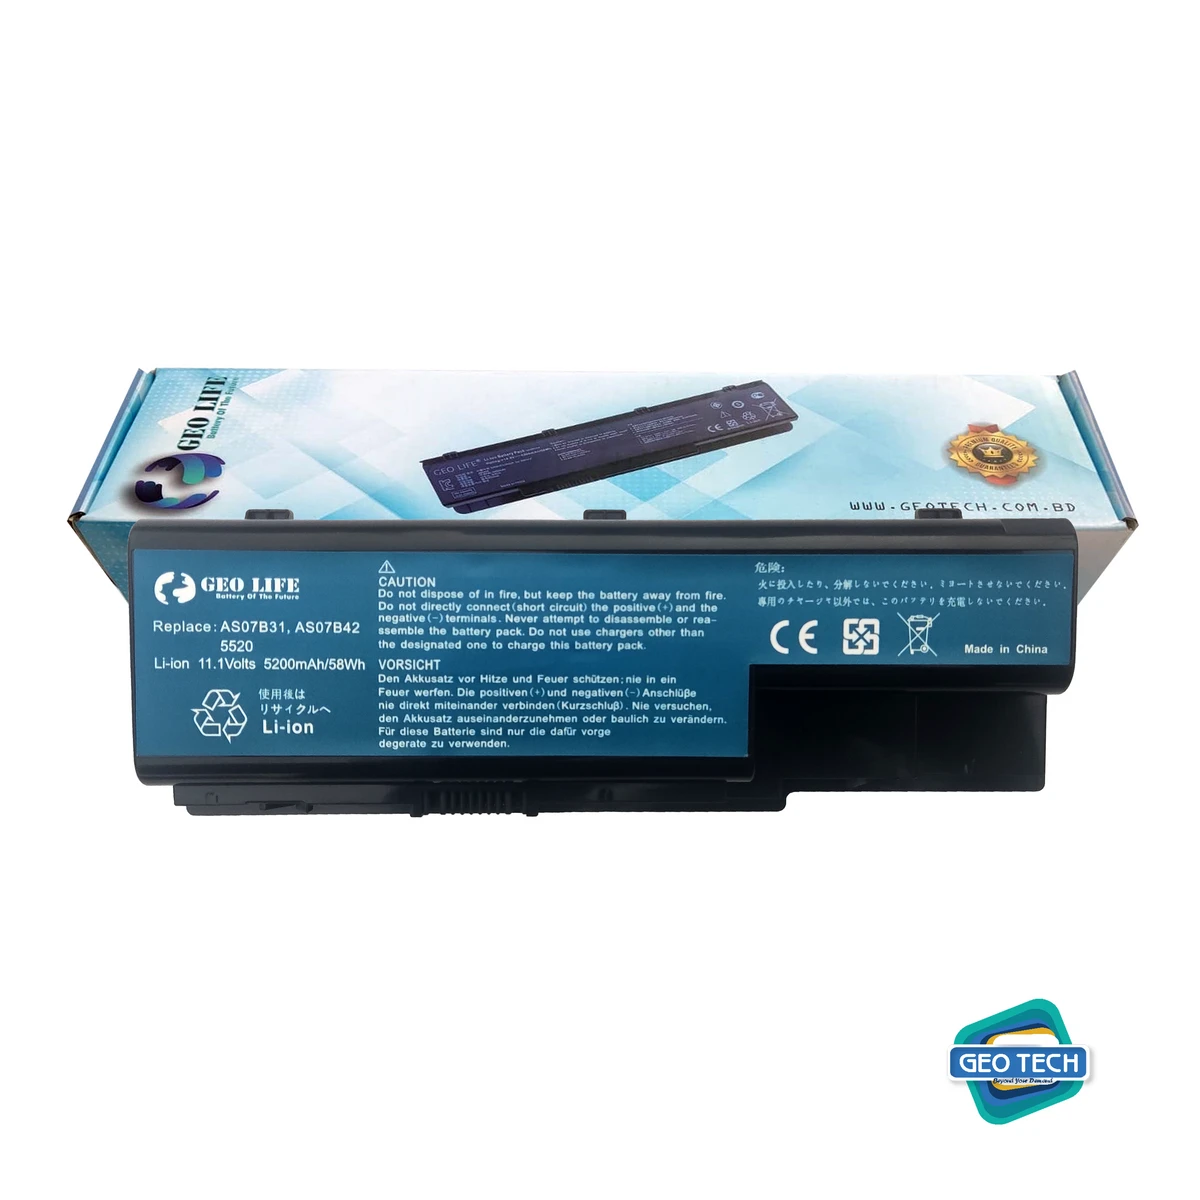 Laptop Battery For Acer Aspire 5920 5920G 5930 5930G Oem quality Geo Life Brand